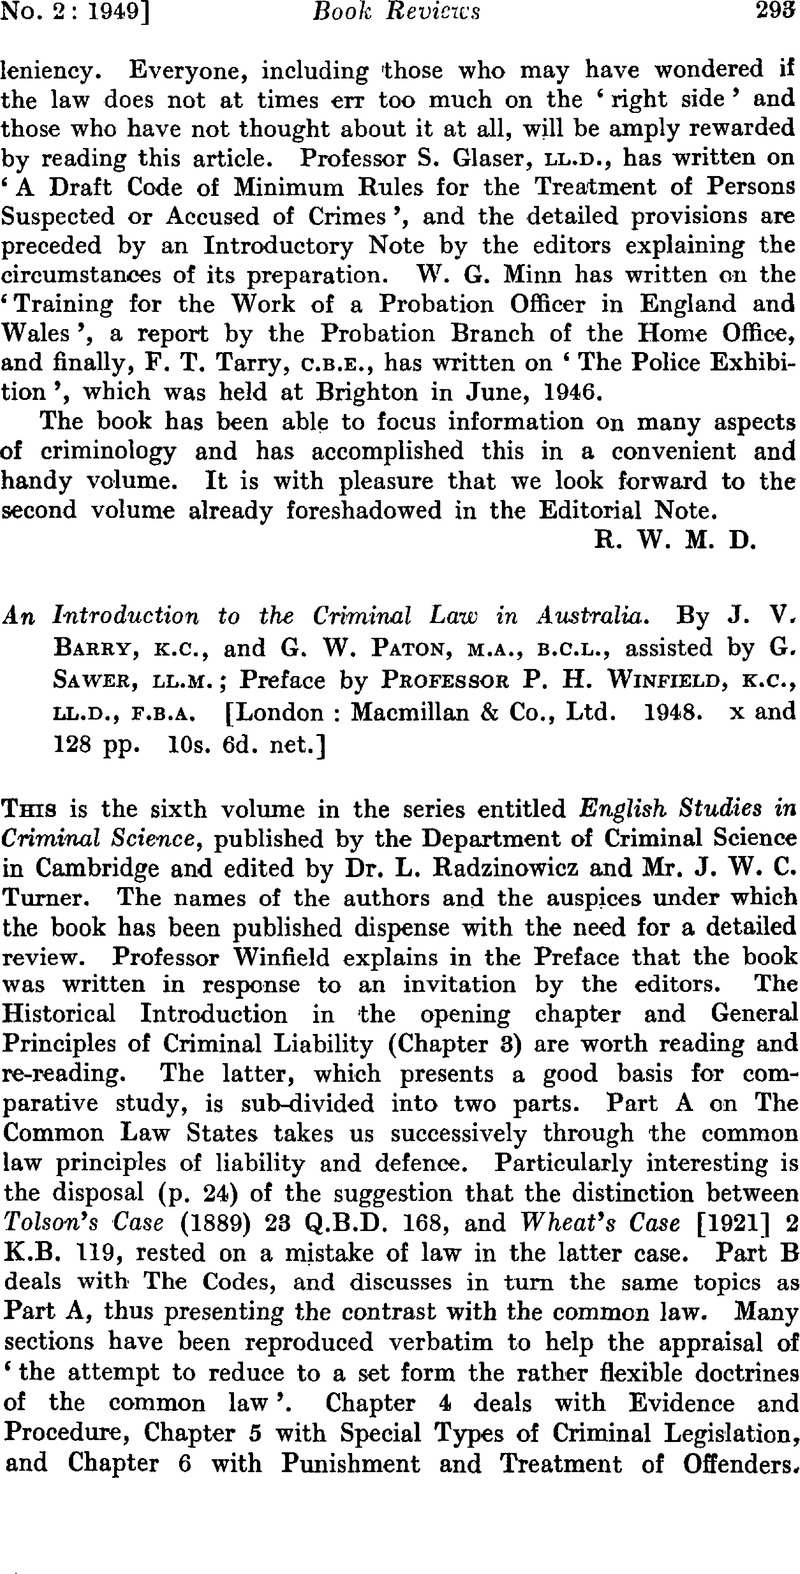 An Introduction To The Criminal Law In Australia By J V Barry K C And G W Paton M A B C L Assisted By G Sawer Ll M Preface By Professor P H Winfield K C Ll D